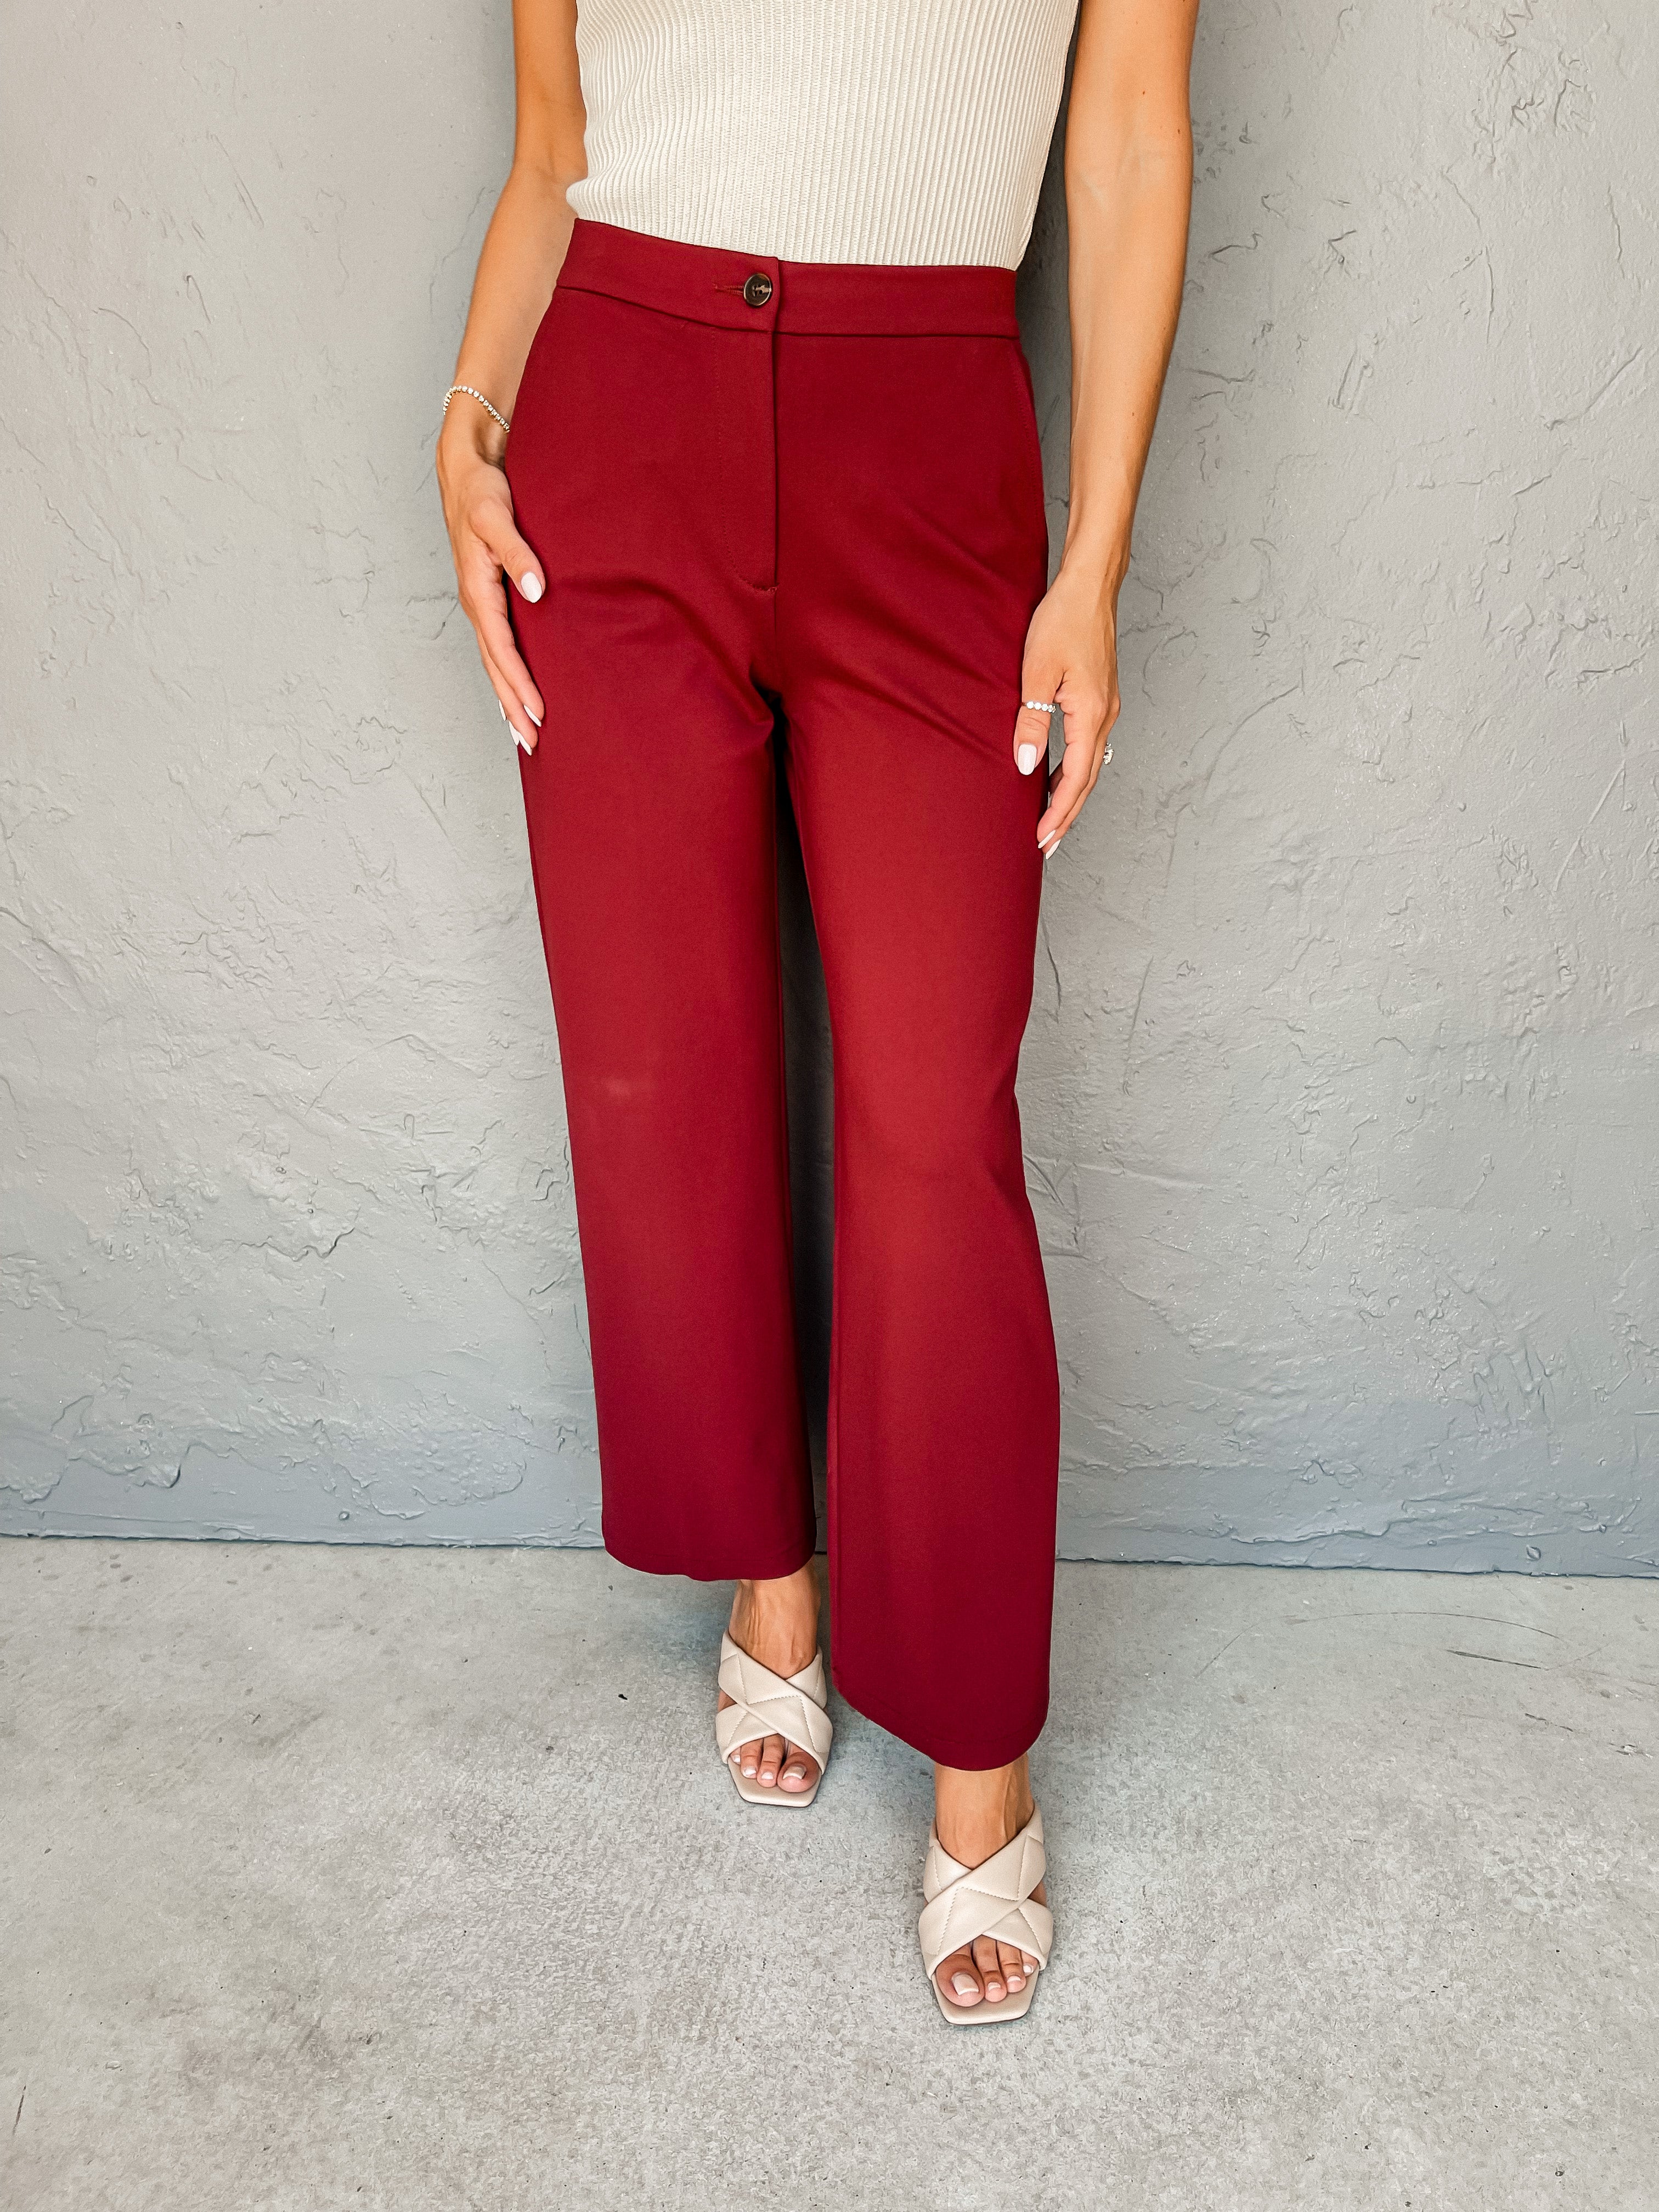 Petite Vanilla Ice High Waisted Wide Leg Pants for Women Business